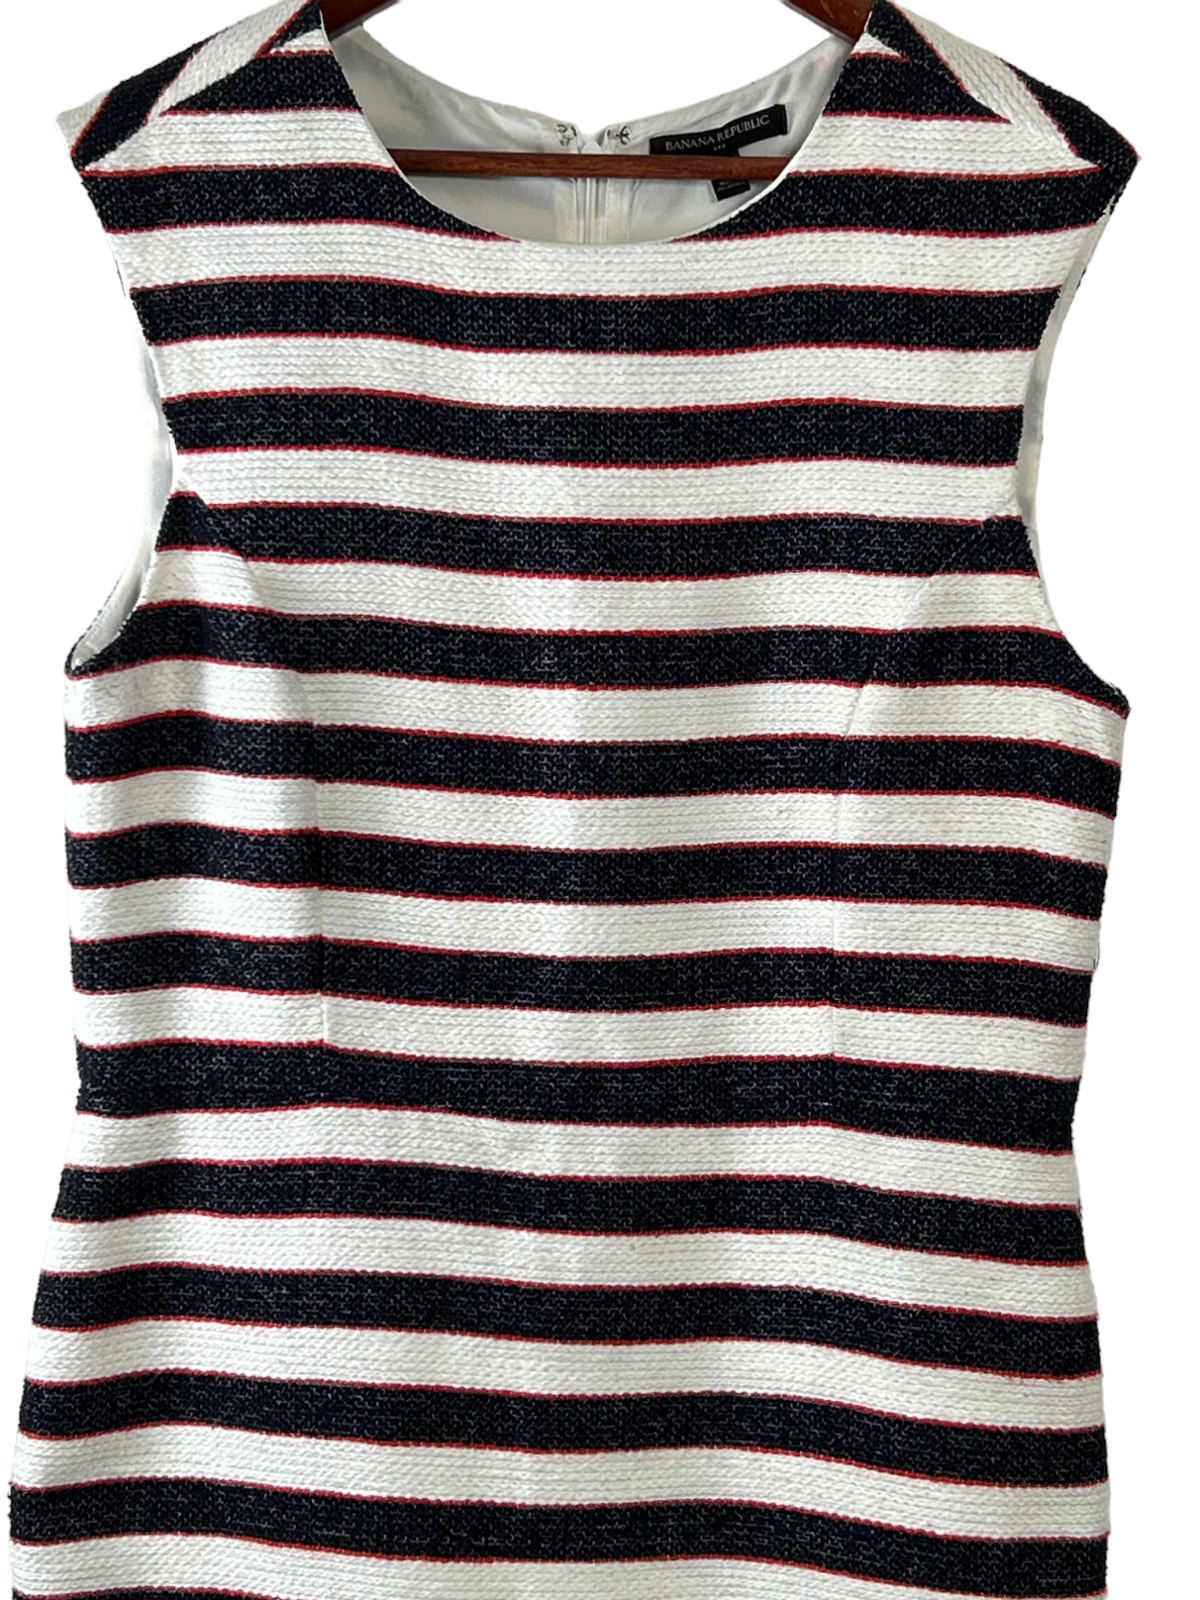 Primary image for Banana Republic Dress Striped Navy White Red Sheath Women’s Size 12 Knee Length